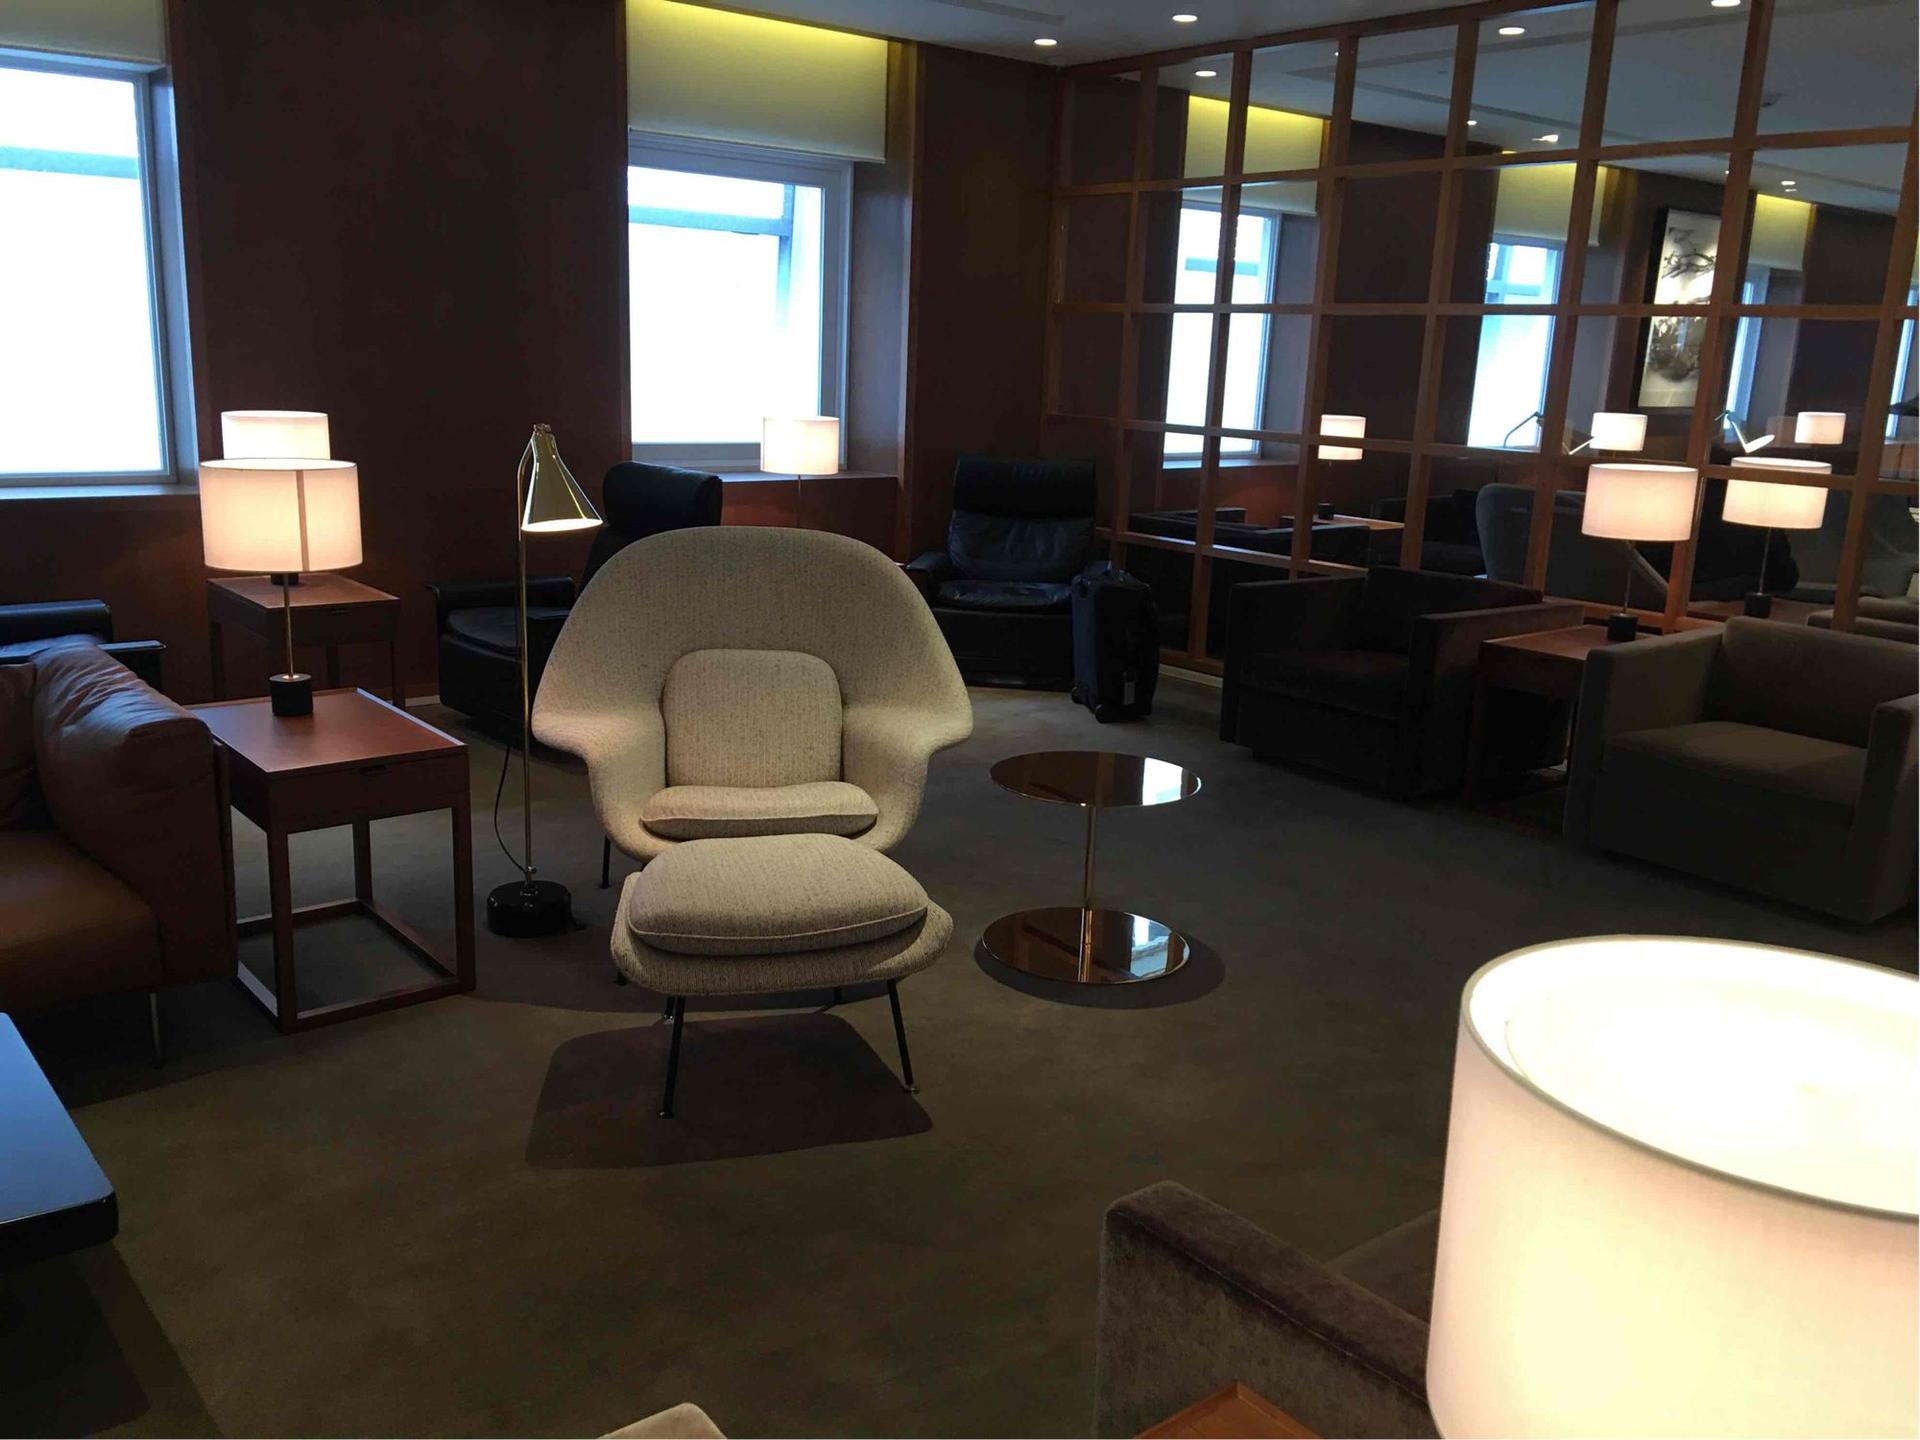 Cathay Pacific Lounge image 3 of 37